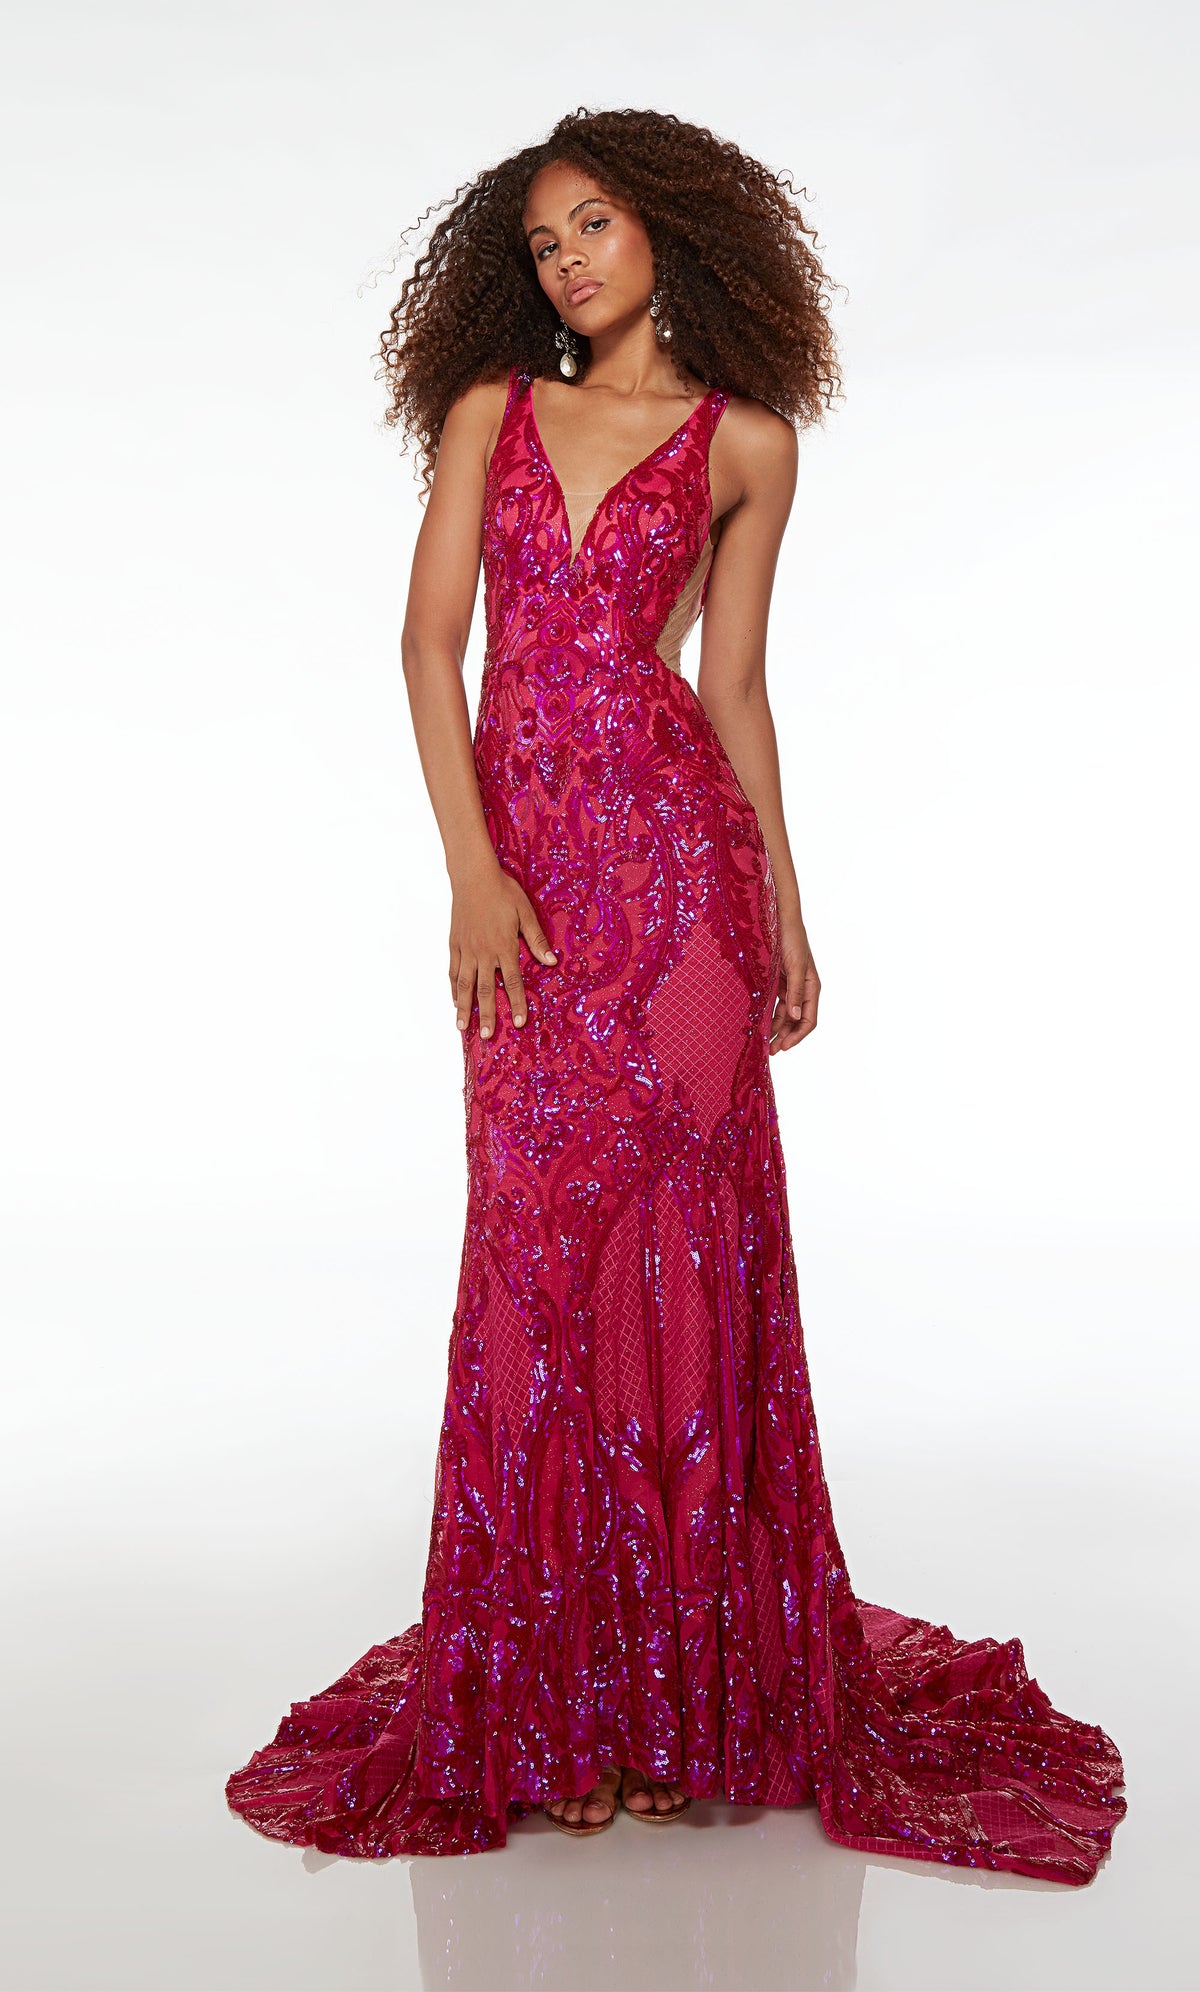 Raspberry pink formal dress: plunging neckline, illusion cutouts, paisley-patterned iridescent sequins, V-shaped back, and graceful train.